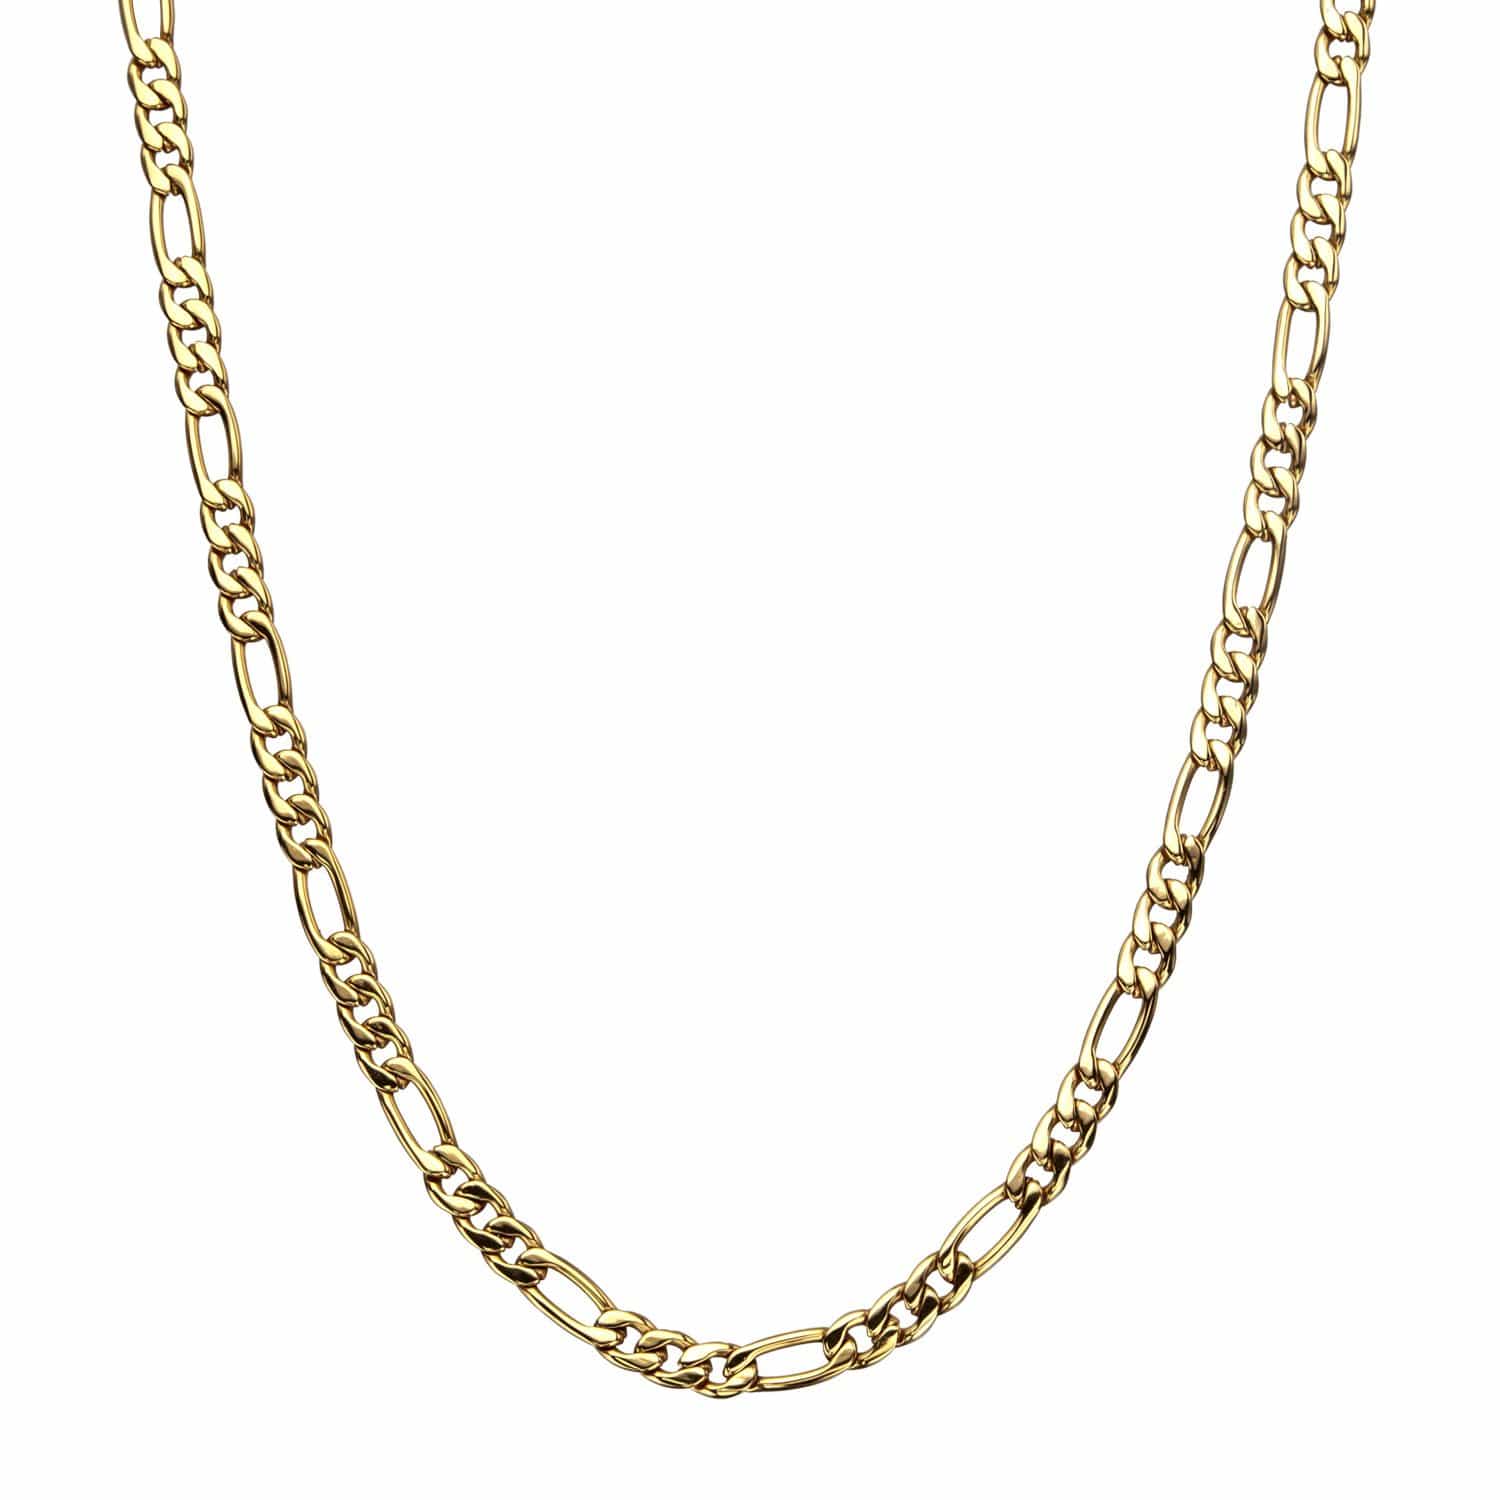 INOX JEWELRY Chains Golden Tone Stainless Steel Polished 6mm Classic Figaro Chain